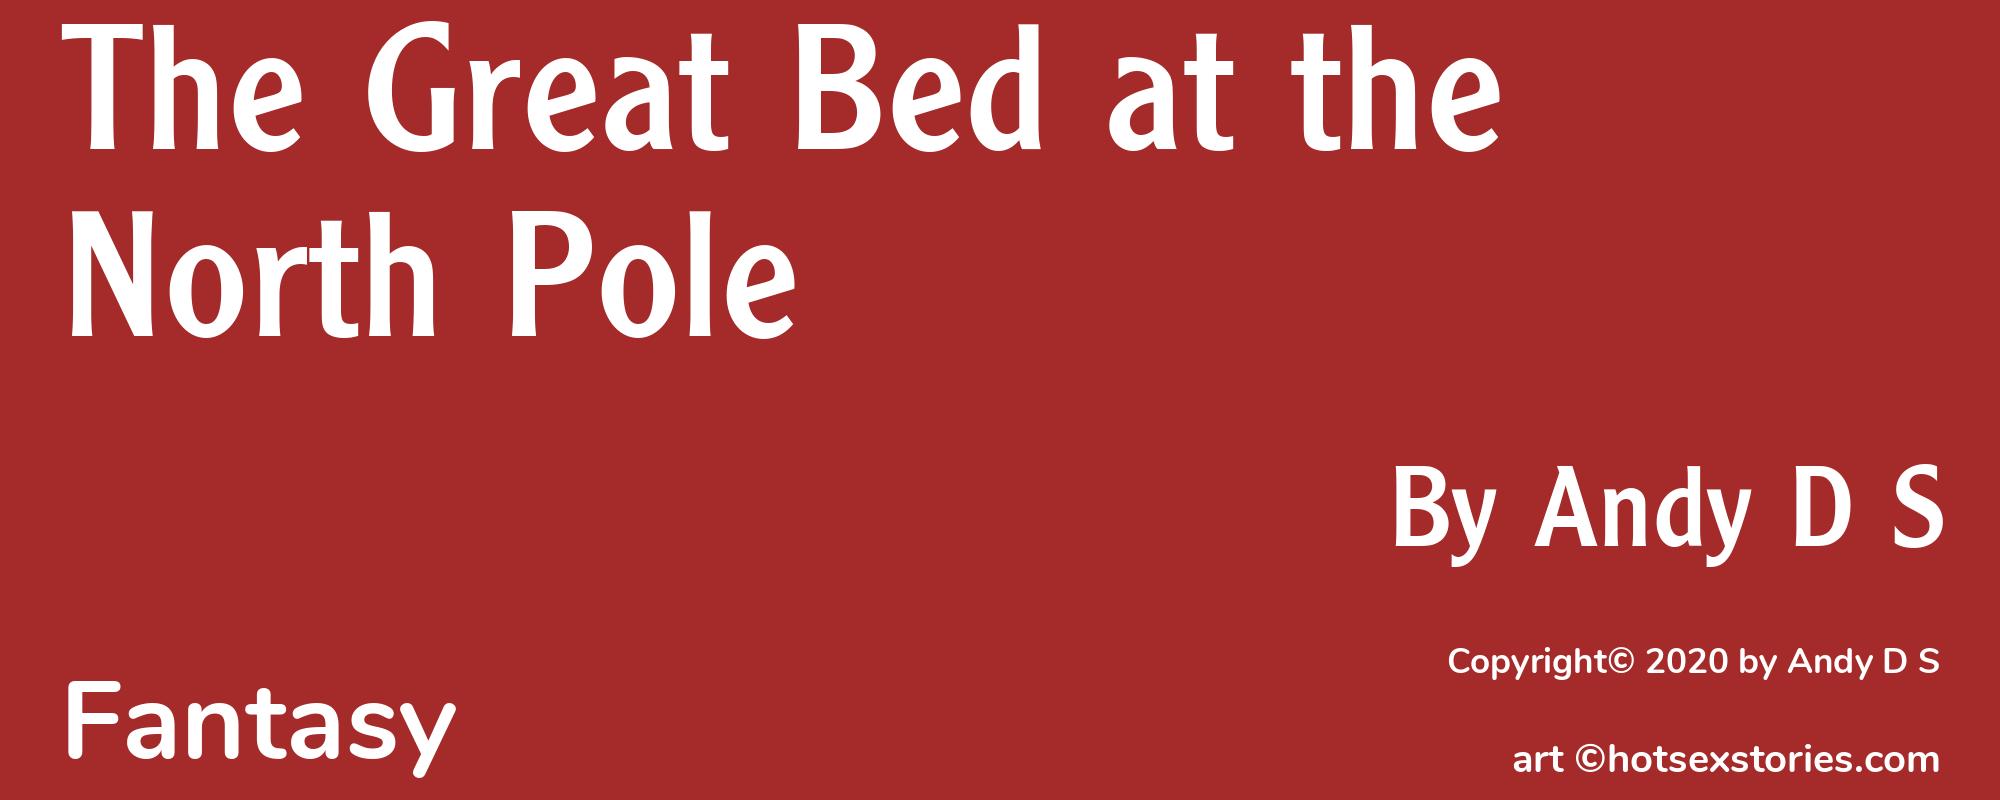 The Great Bed at the North Pole - Cover